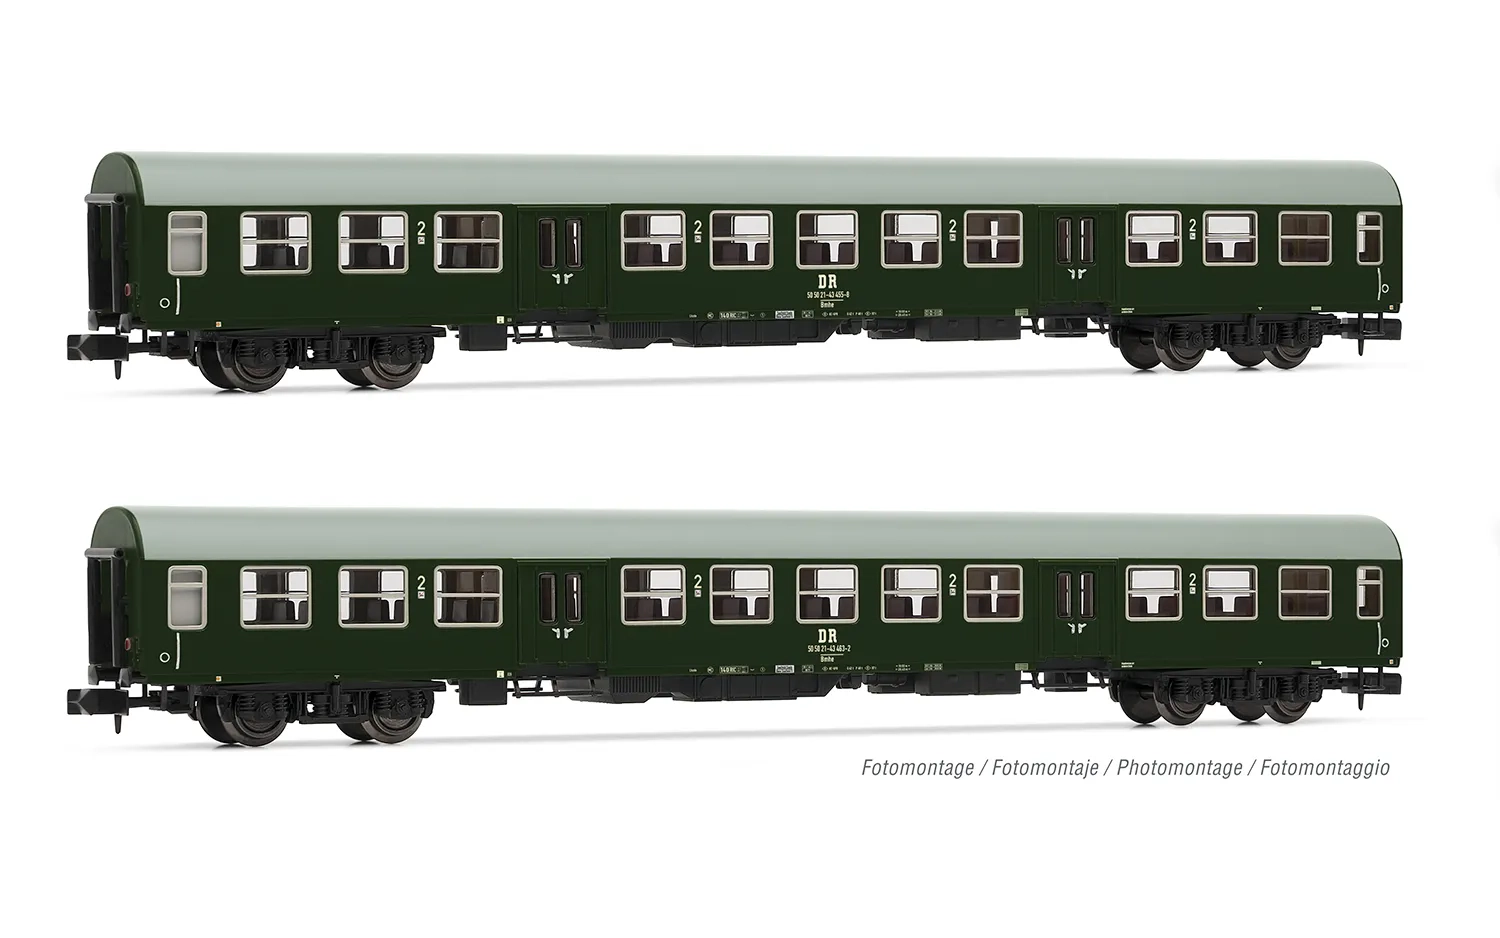 DR, 2-unit set of "lange Halberstädter" regional coaches, dark green/grey livery, including 2 x Bmhe coaches, period IV